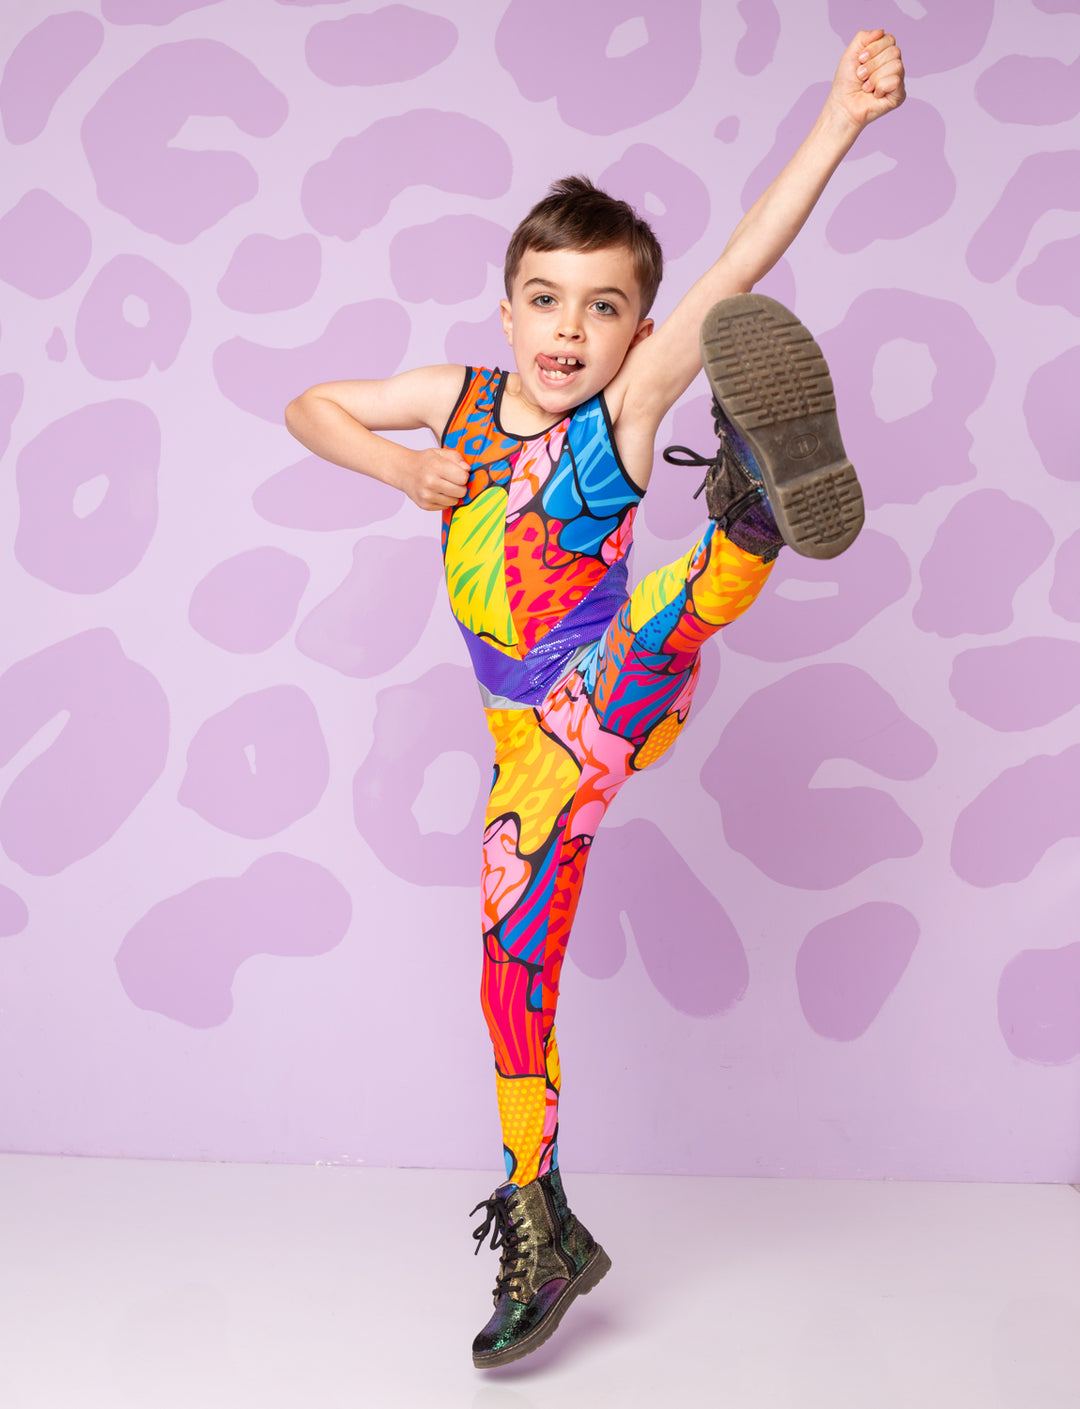 Boy doing a high kick wearing a colourful patterned catsuit